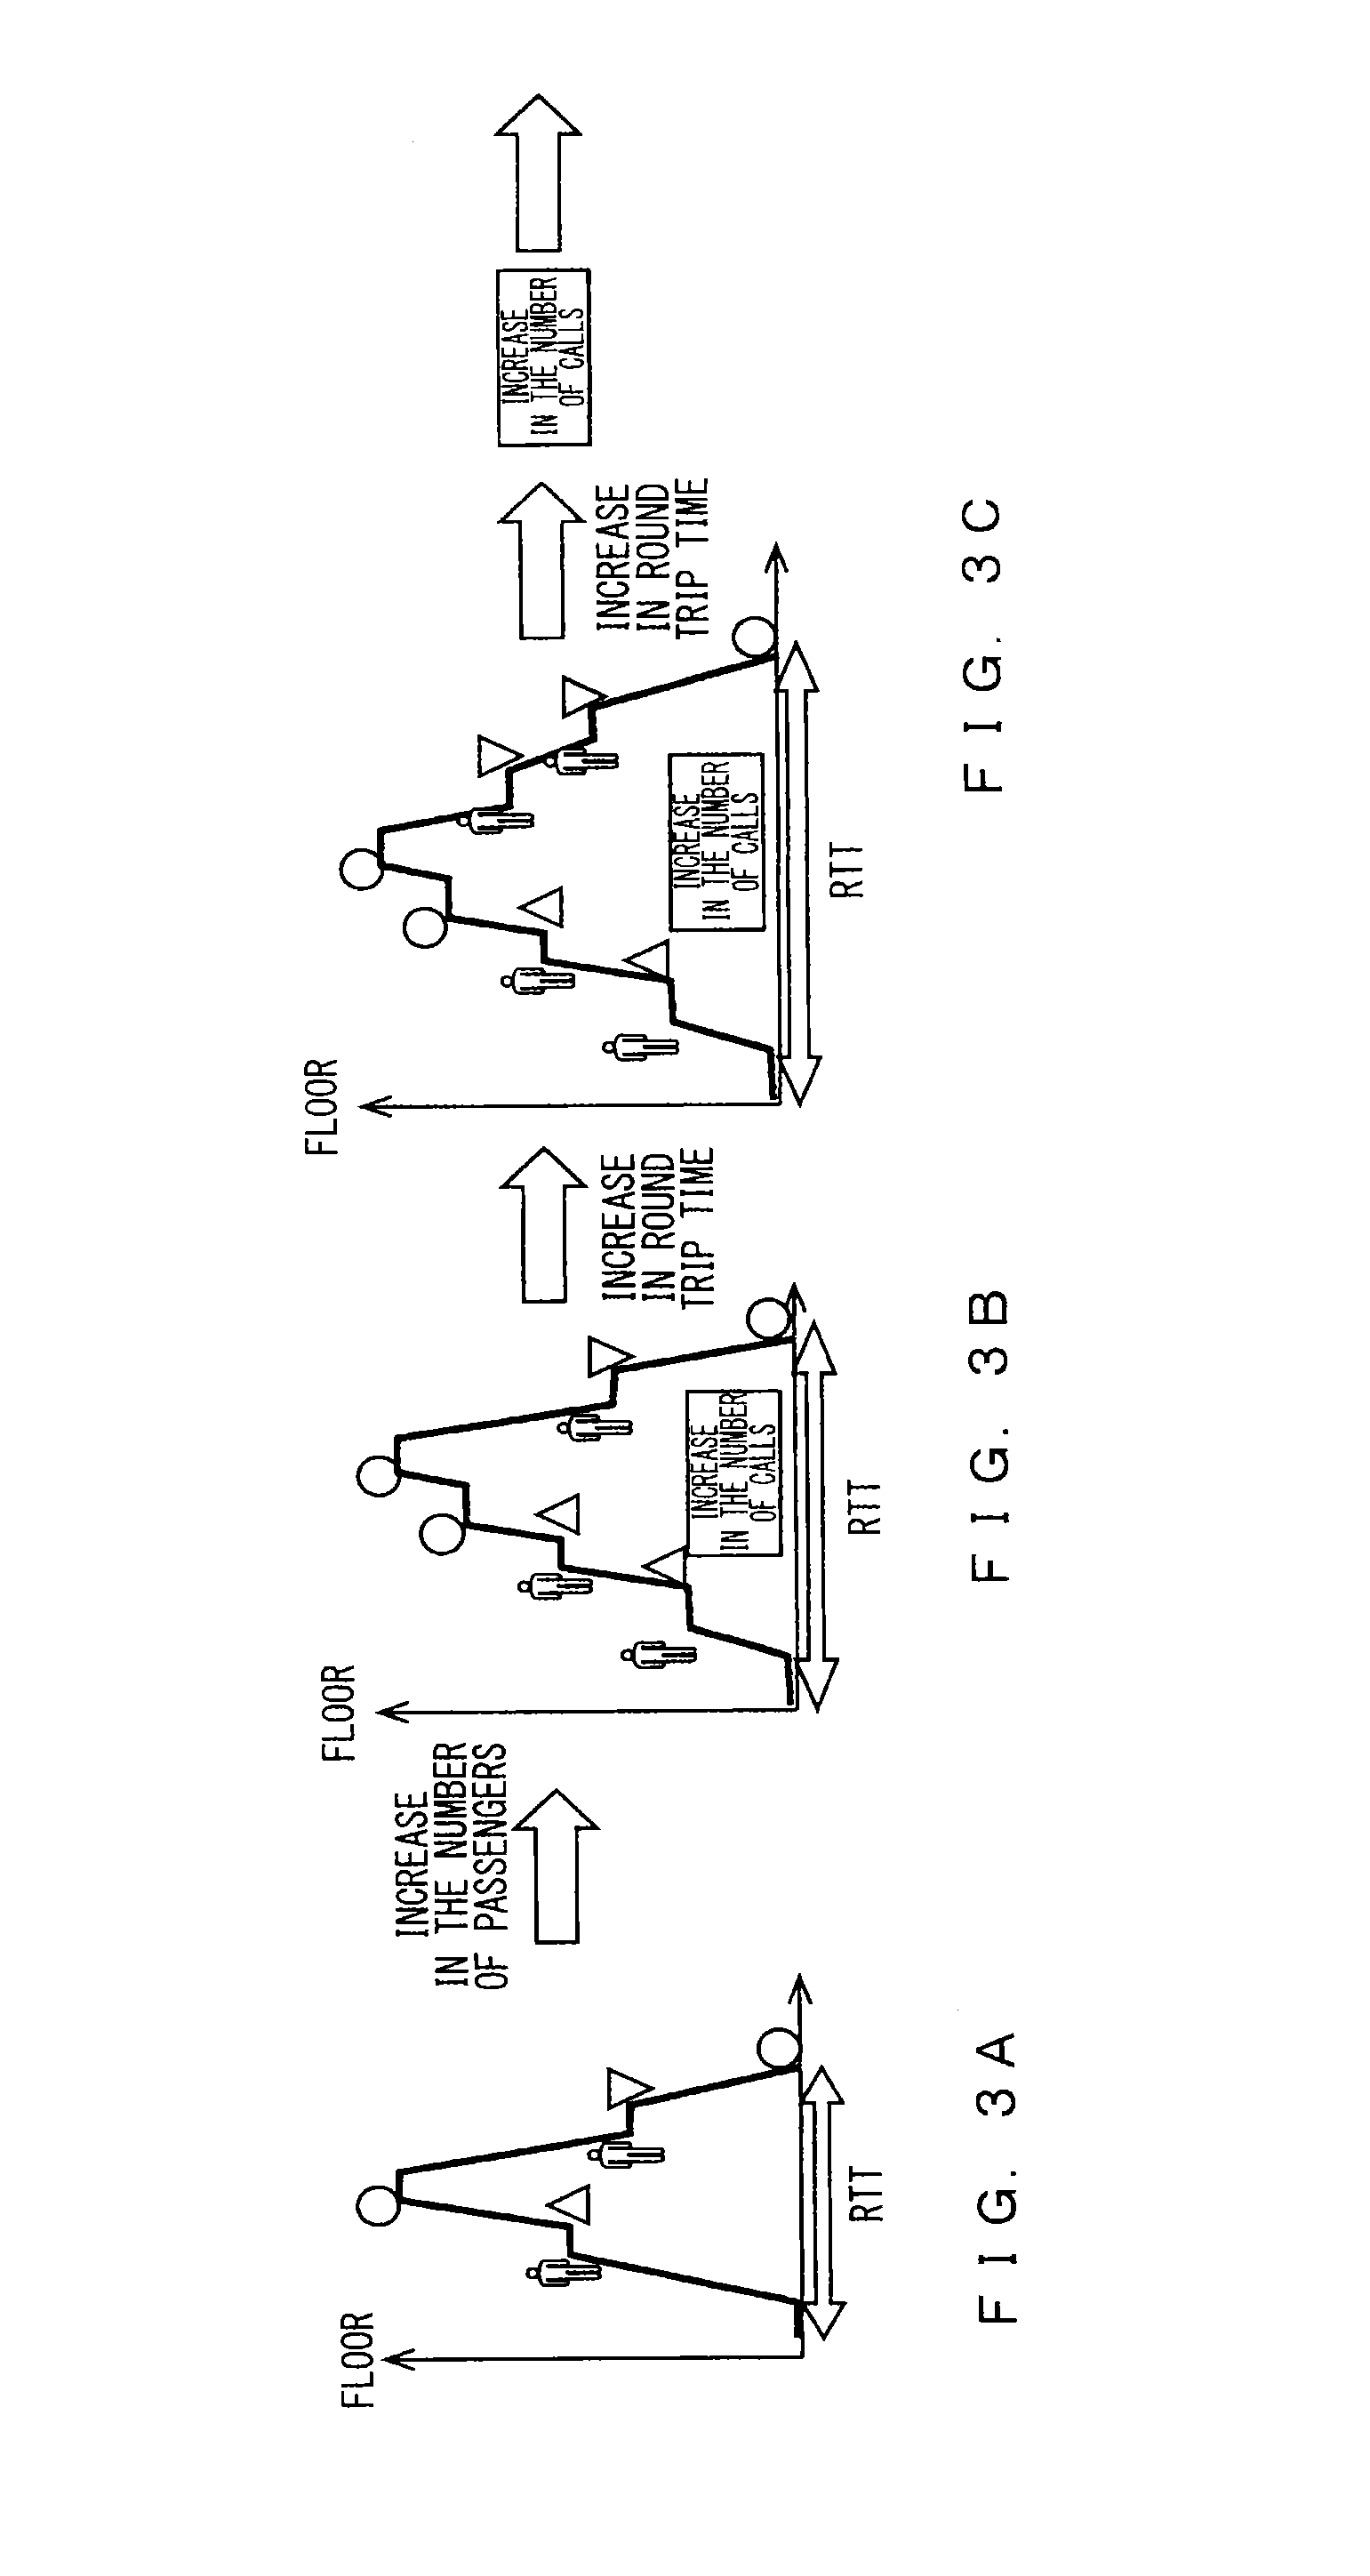 Elevator facility planning support apparatus